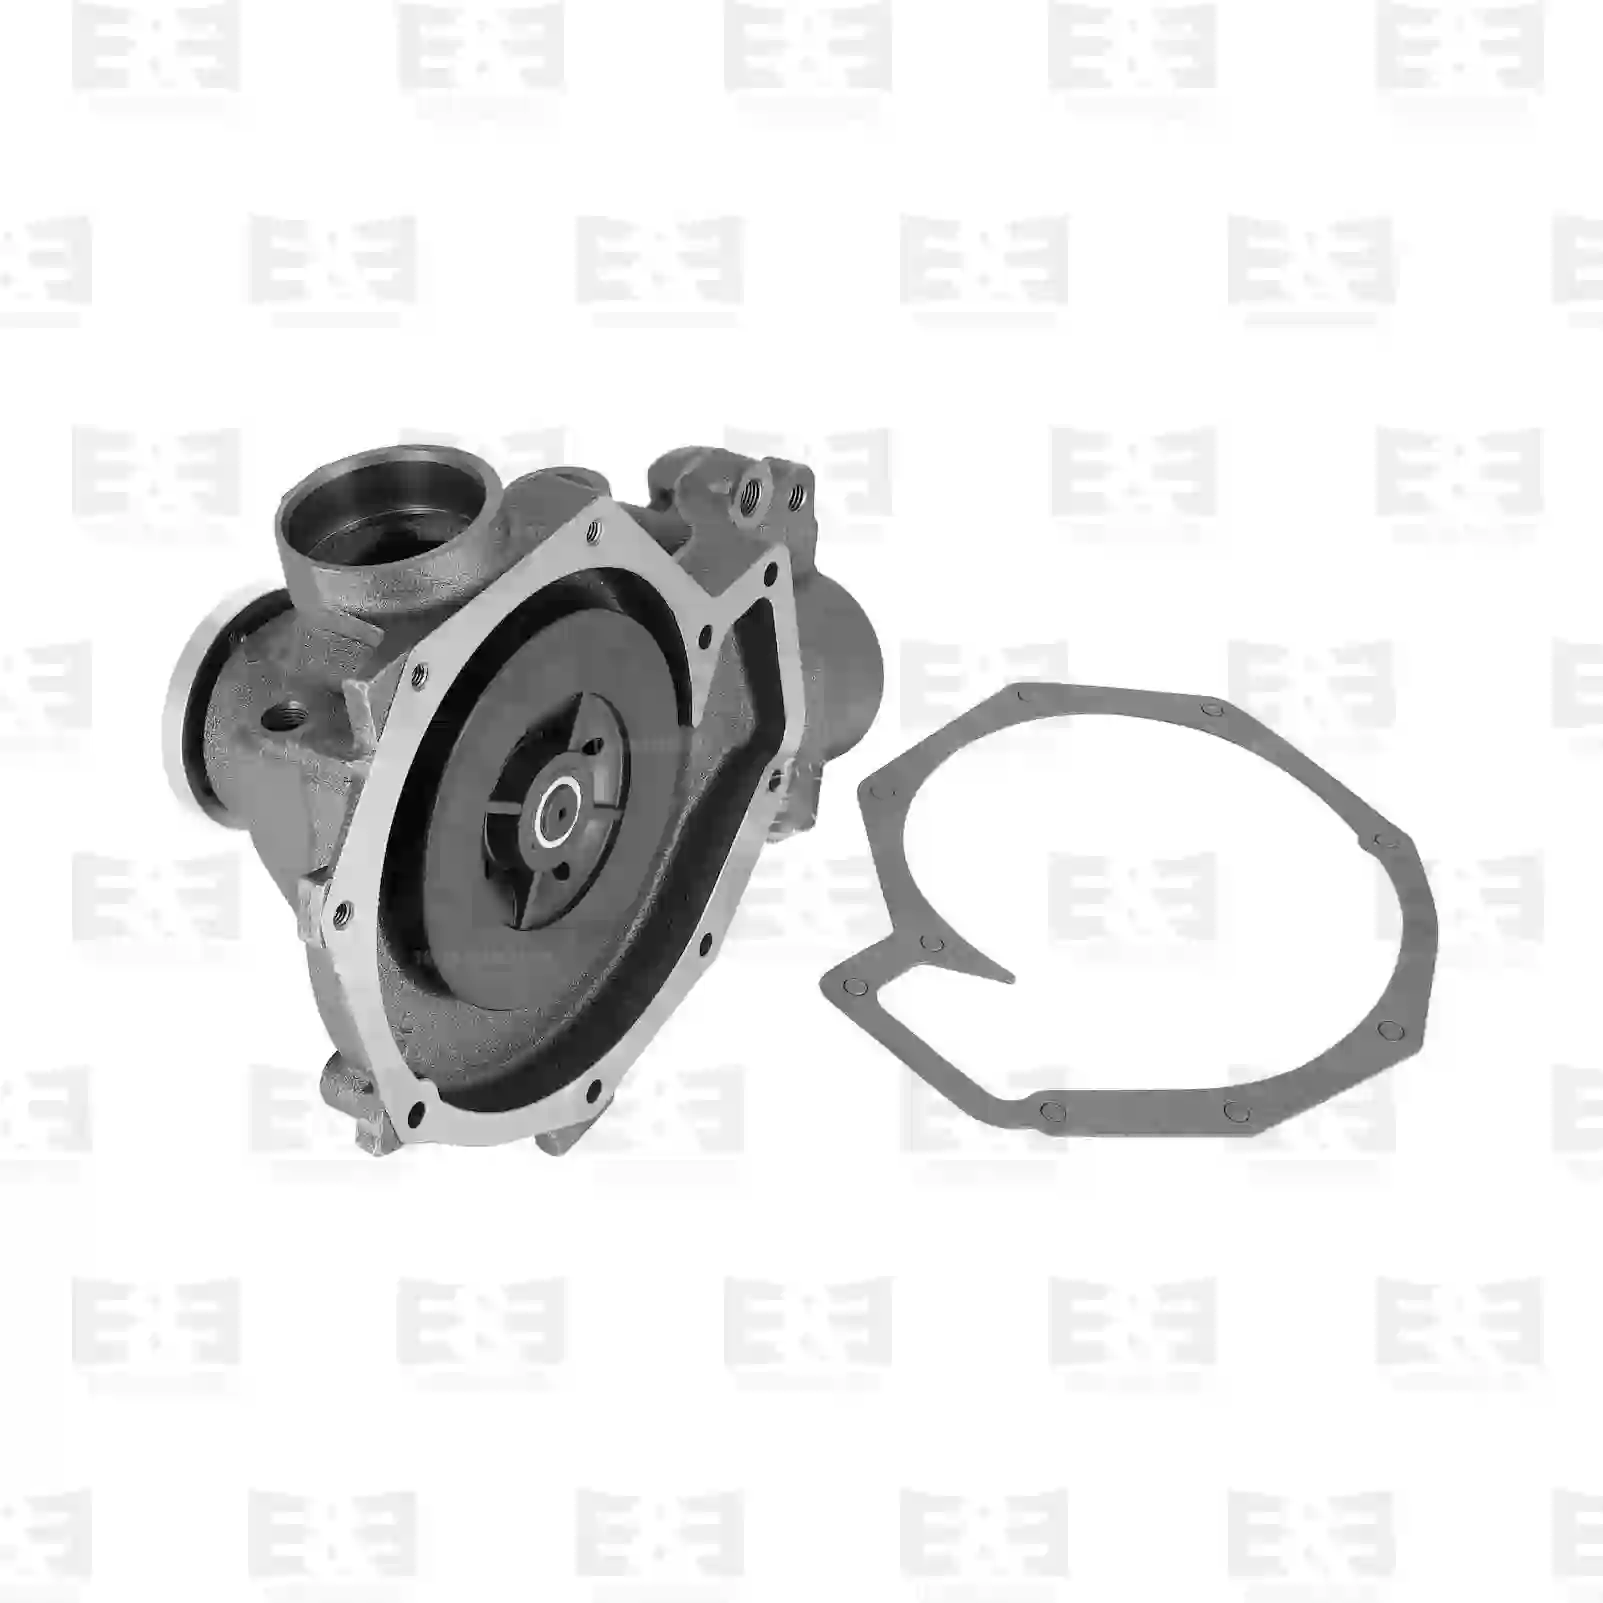  Water pump, complete with gaskets || E&E Truck Spare Parts | Truck Spare Parts, Auotomotive Spare Parts